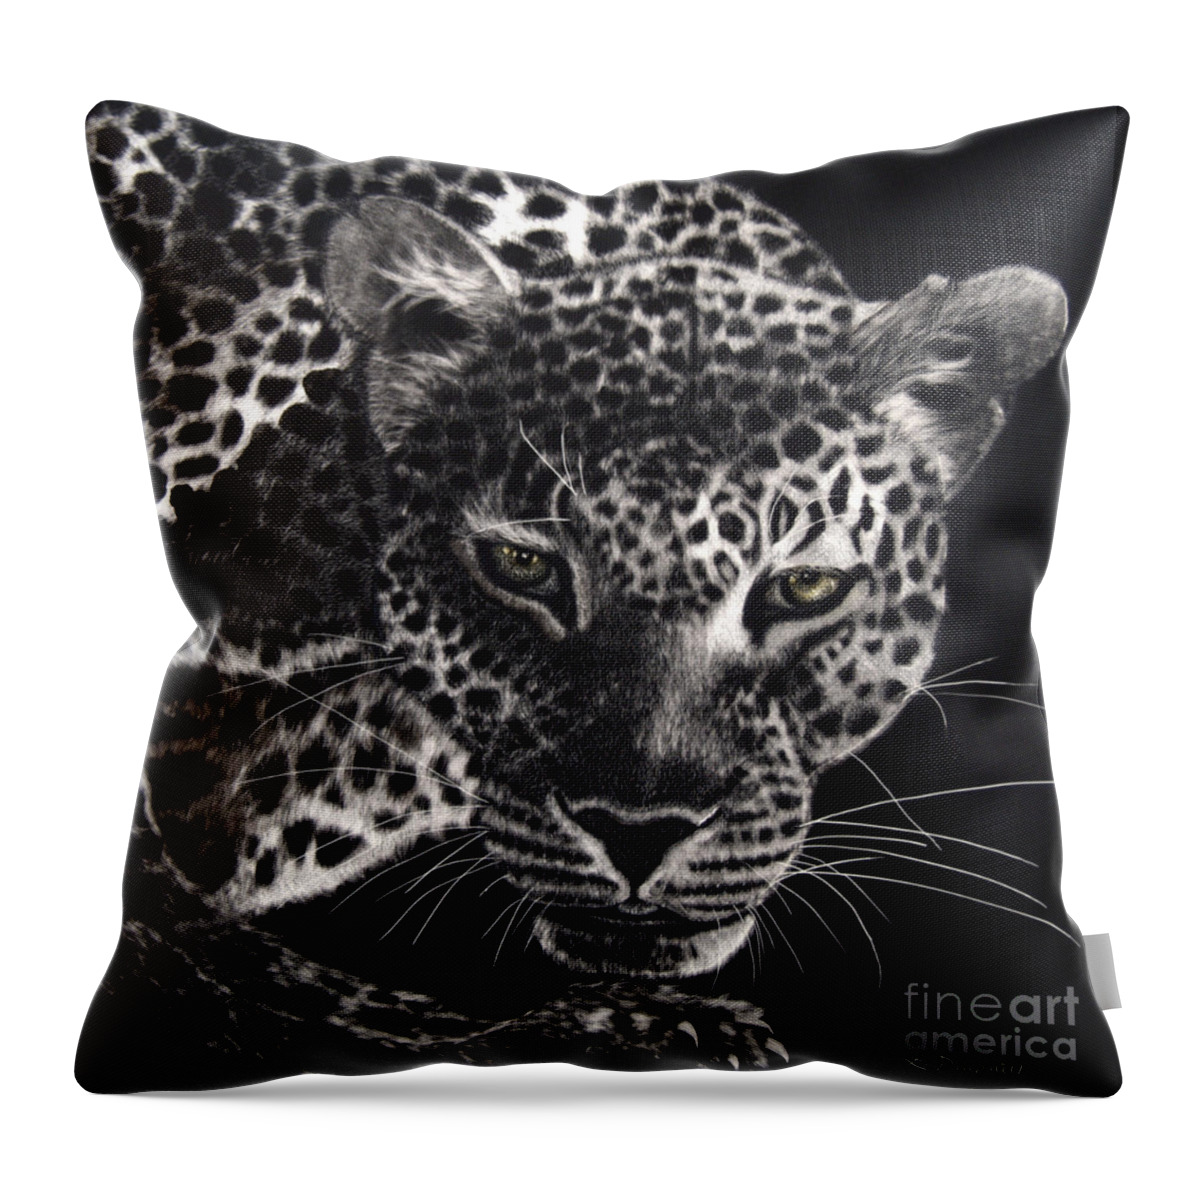 Leopard Throw Pillow featuring the drawing Night Prowler by Lora Duguay